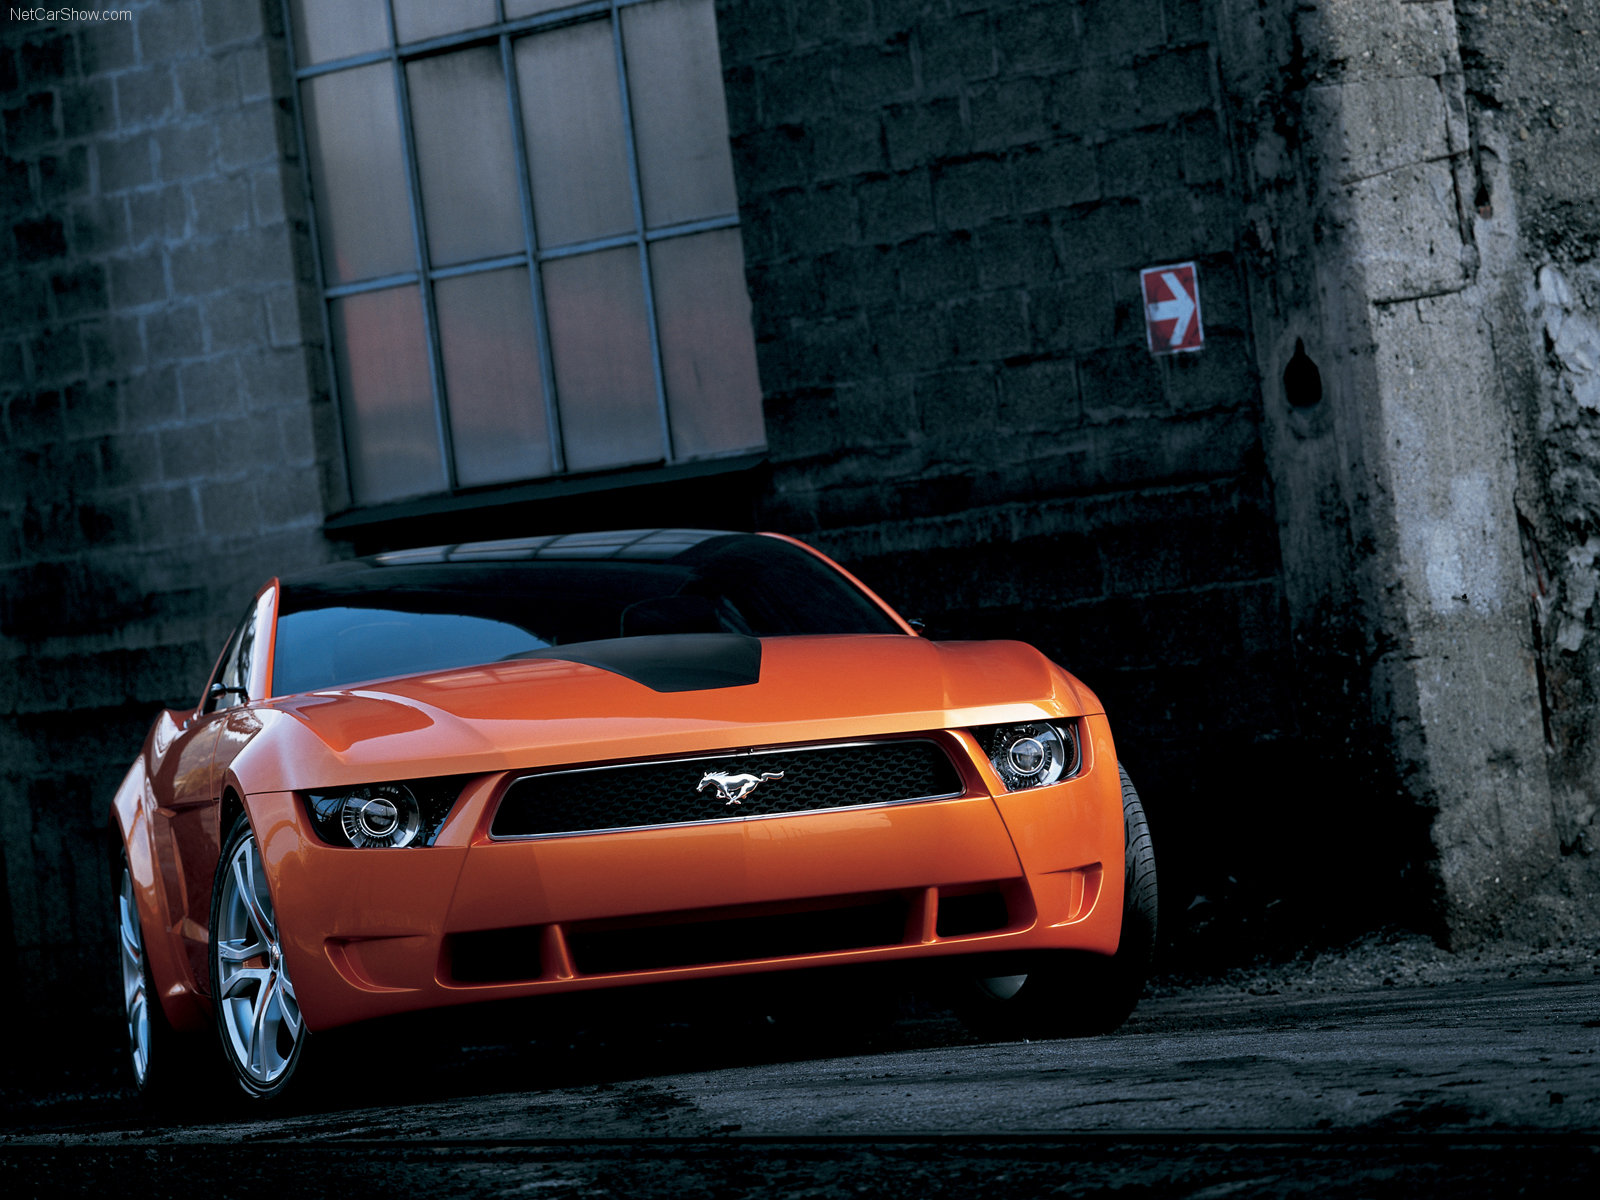 Download full size Orange Mustang front Ford wallpaper / 1600x1200